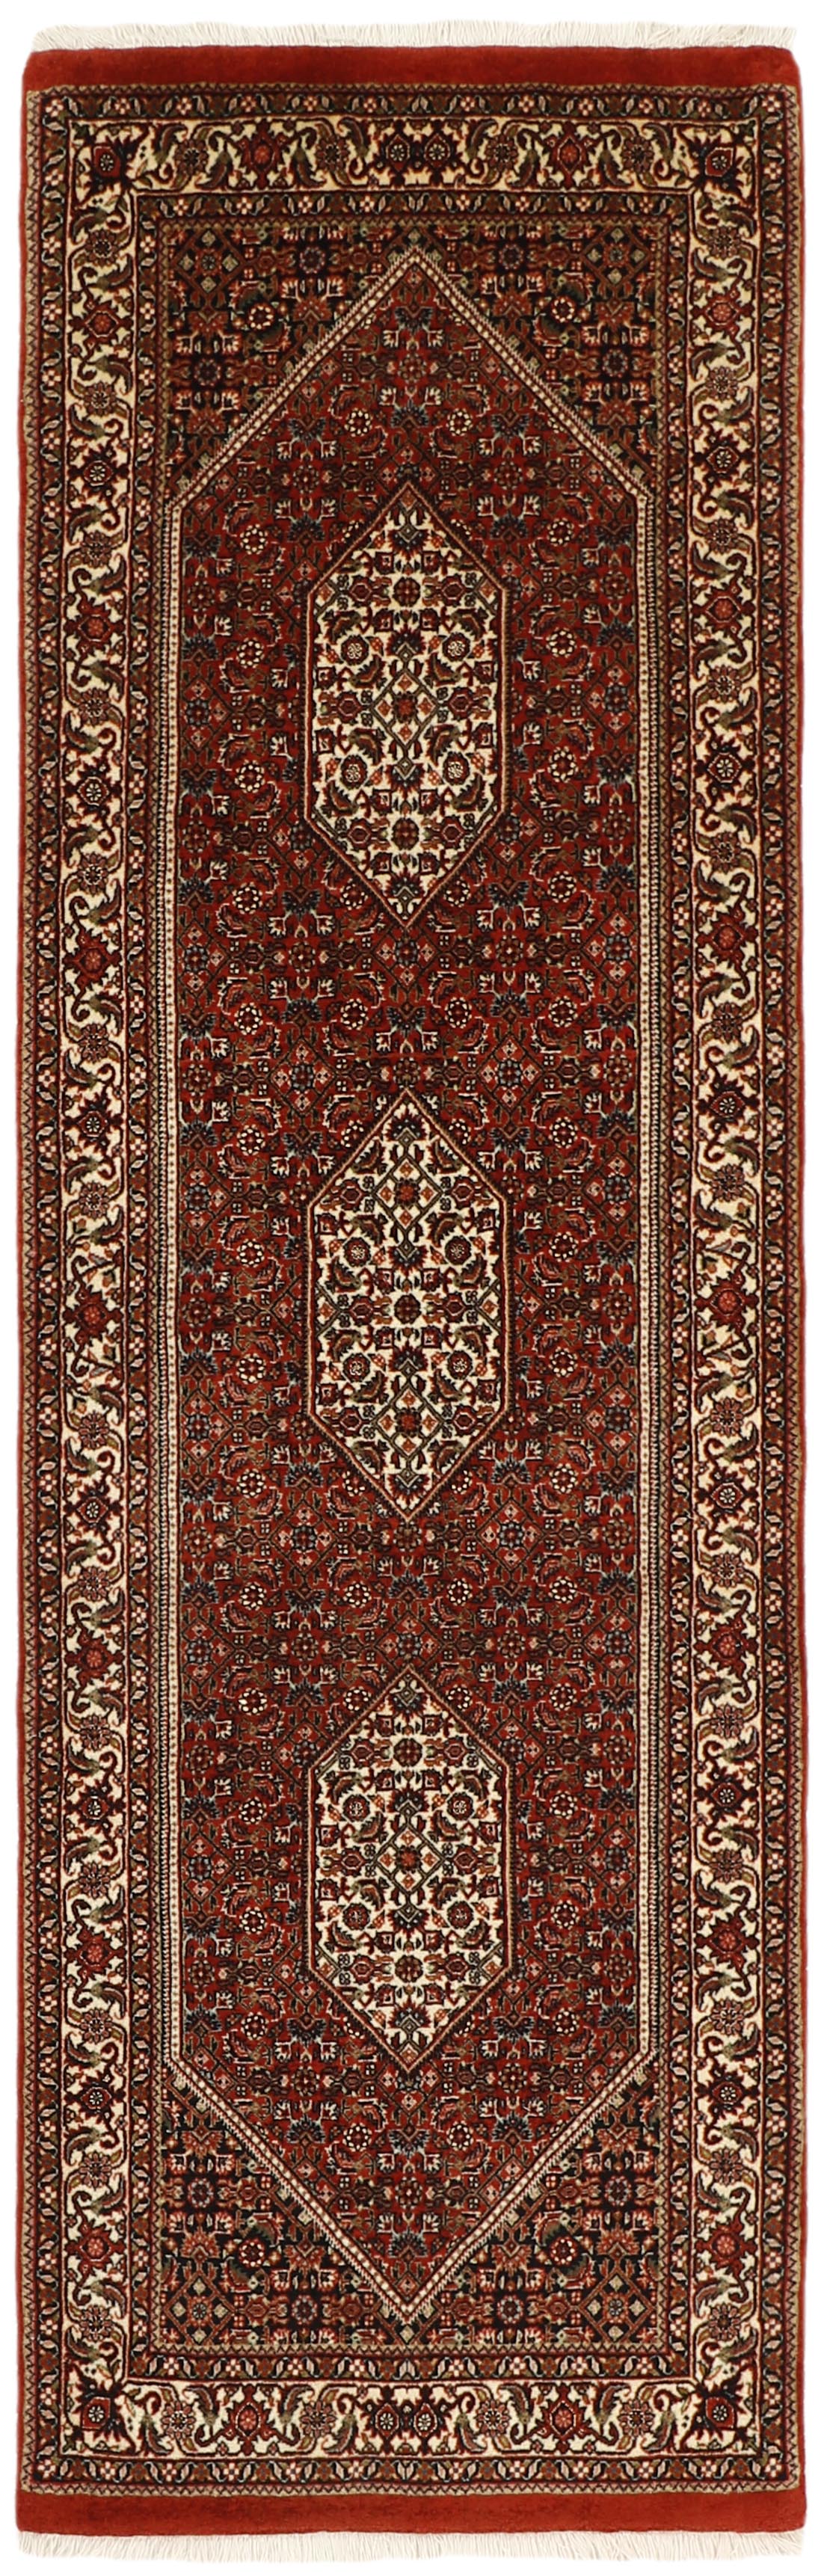 Red persian runner with traditional floral design